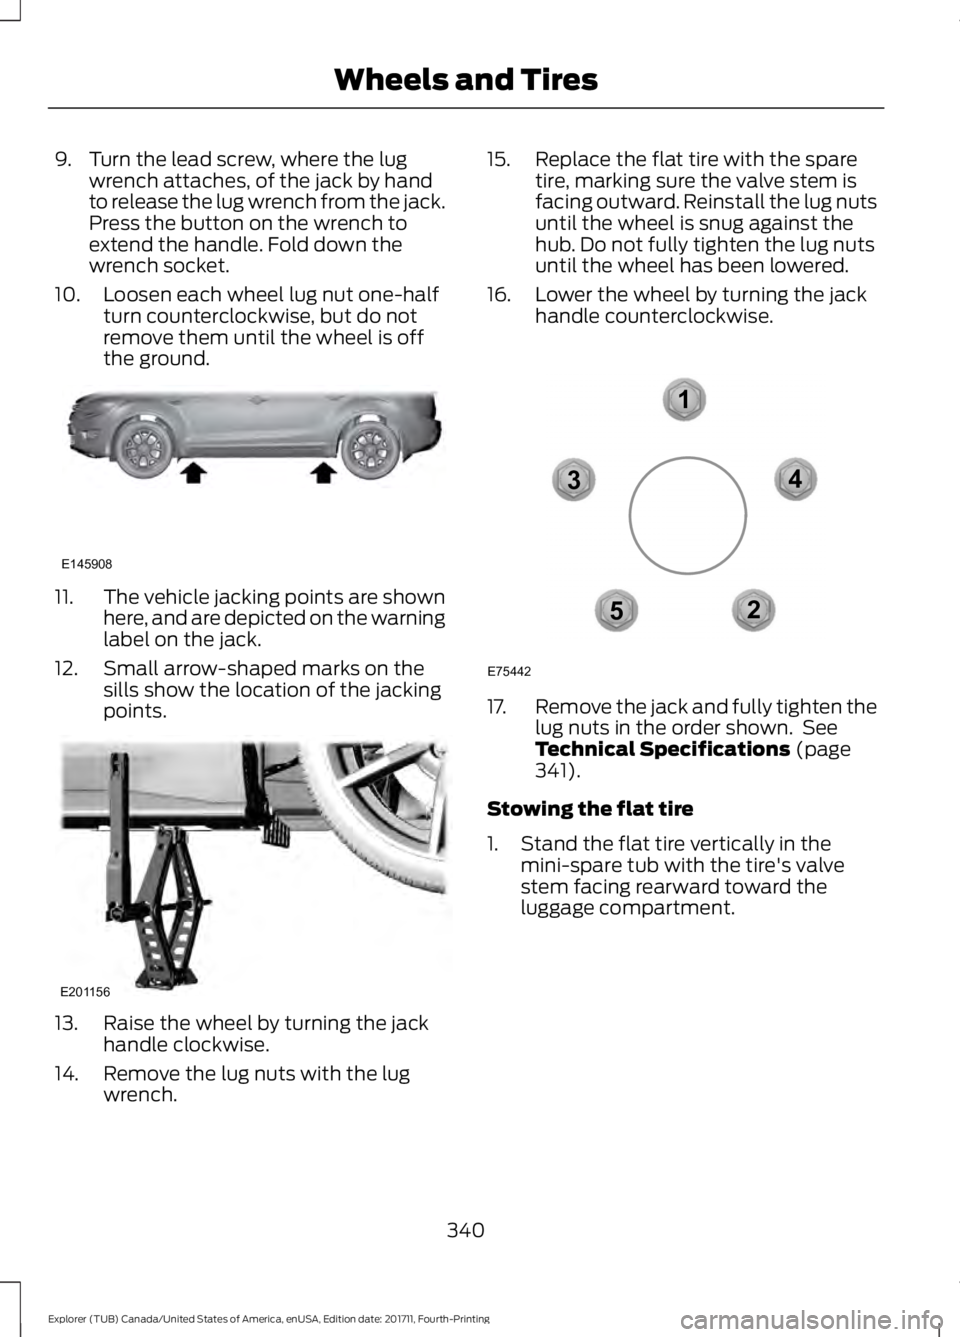 FORD EXPLORER 2018  Owners Manual 9. Turn the lead screw, where the lug
wrench attaches, of the jack by hand
to release the lug wrench from the jack.
Press the button on the wrench to
extend the handle. Fold down the
wrench socket.
10